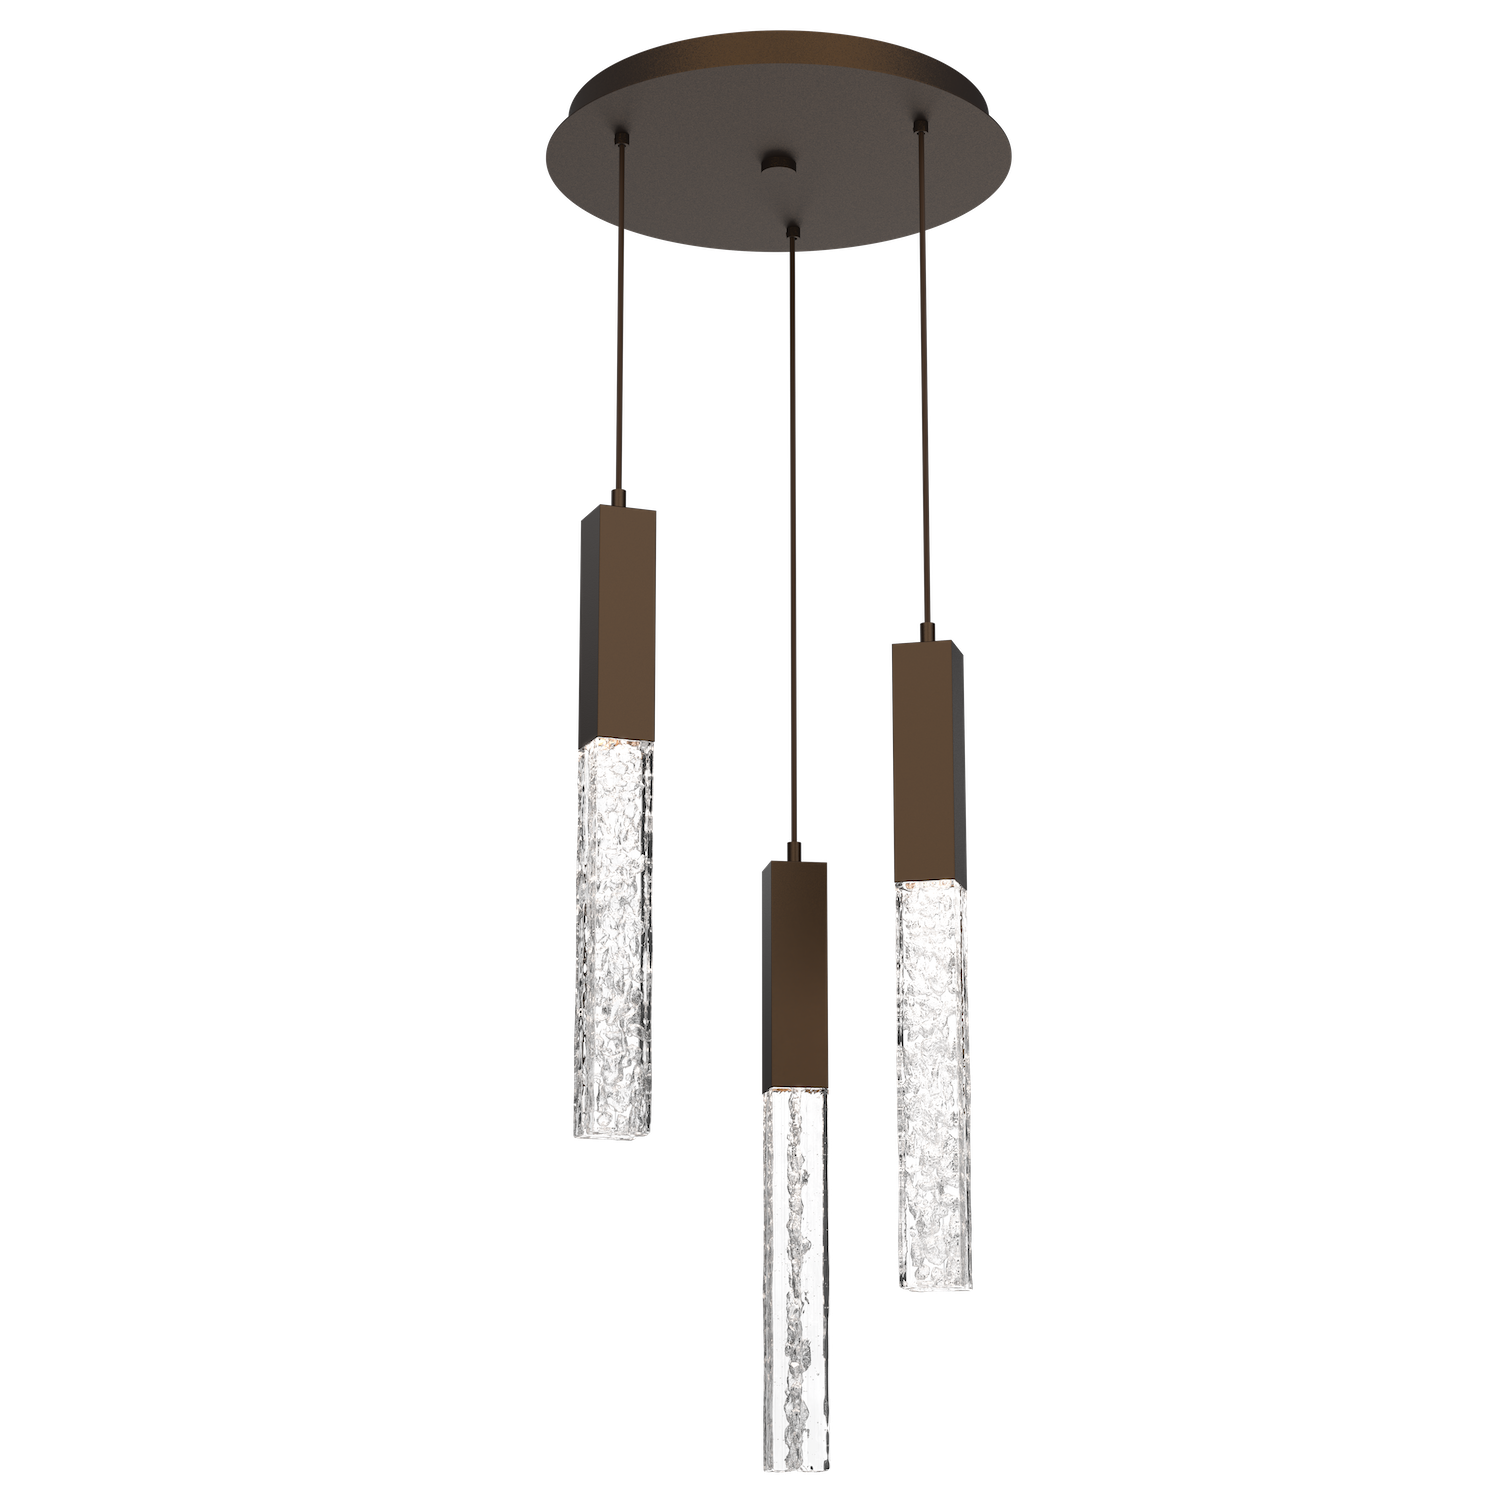 CHB0060-03-FB-GC-Hammerton-Studio-Axis-3-Light-Pendant-Chandelier-with-Flat-Bronze-finish-and-clear-cast-glass-and-LED-lamping